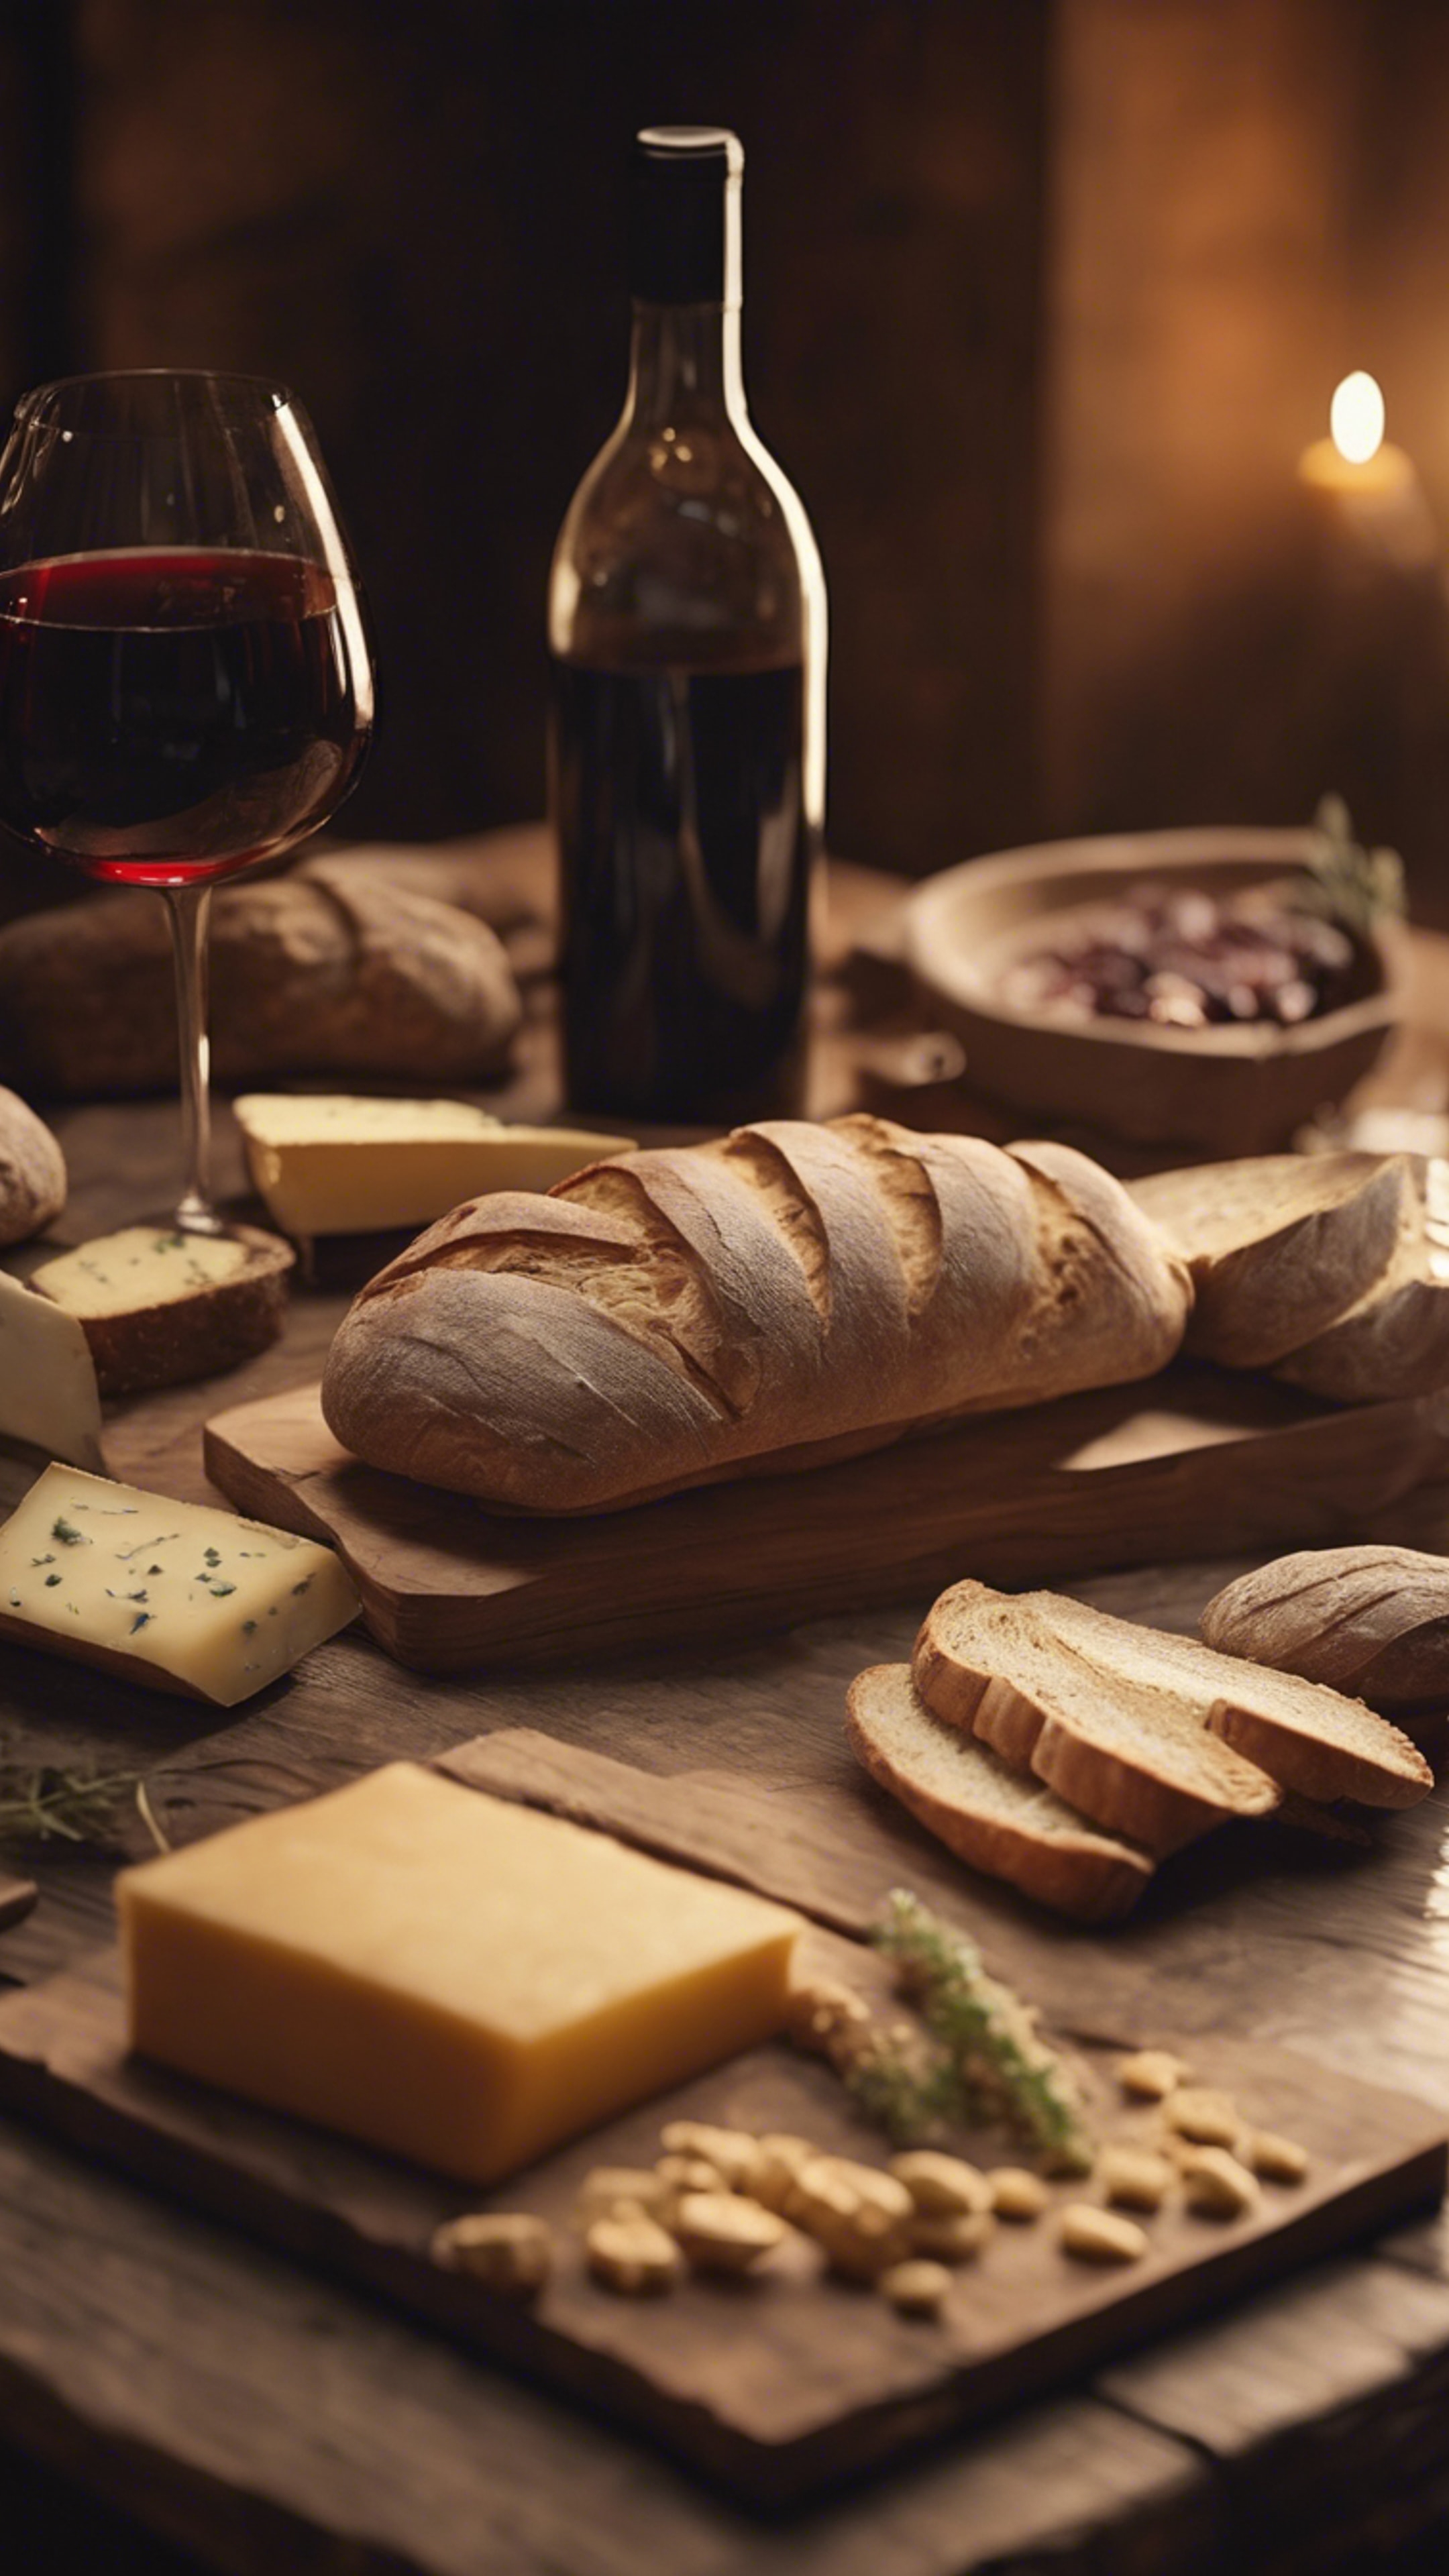 Detailed close-up of a rustic French country-style wooden table set with fresh bread, wine, and cheese under warm interior lighting. ផ្ទាំង​រូបភាព[6a74bb7d88b74d998281]